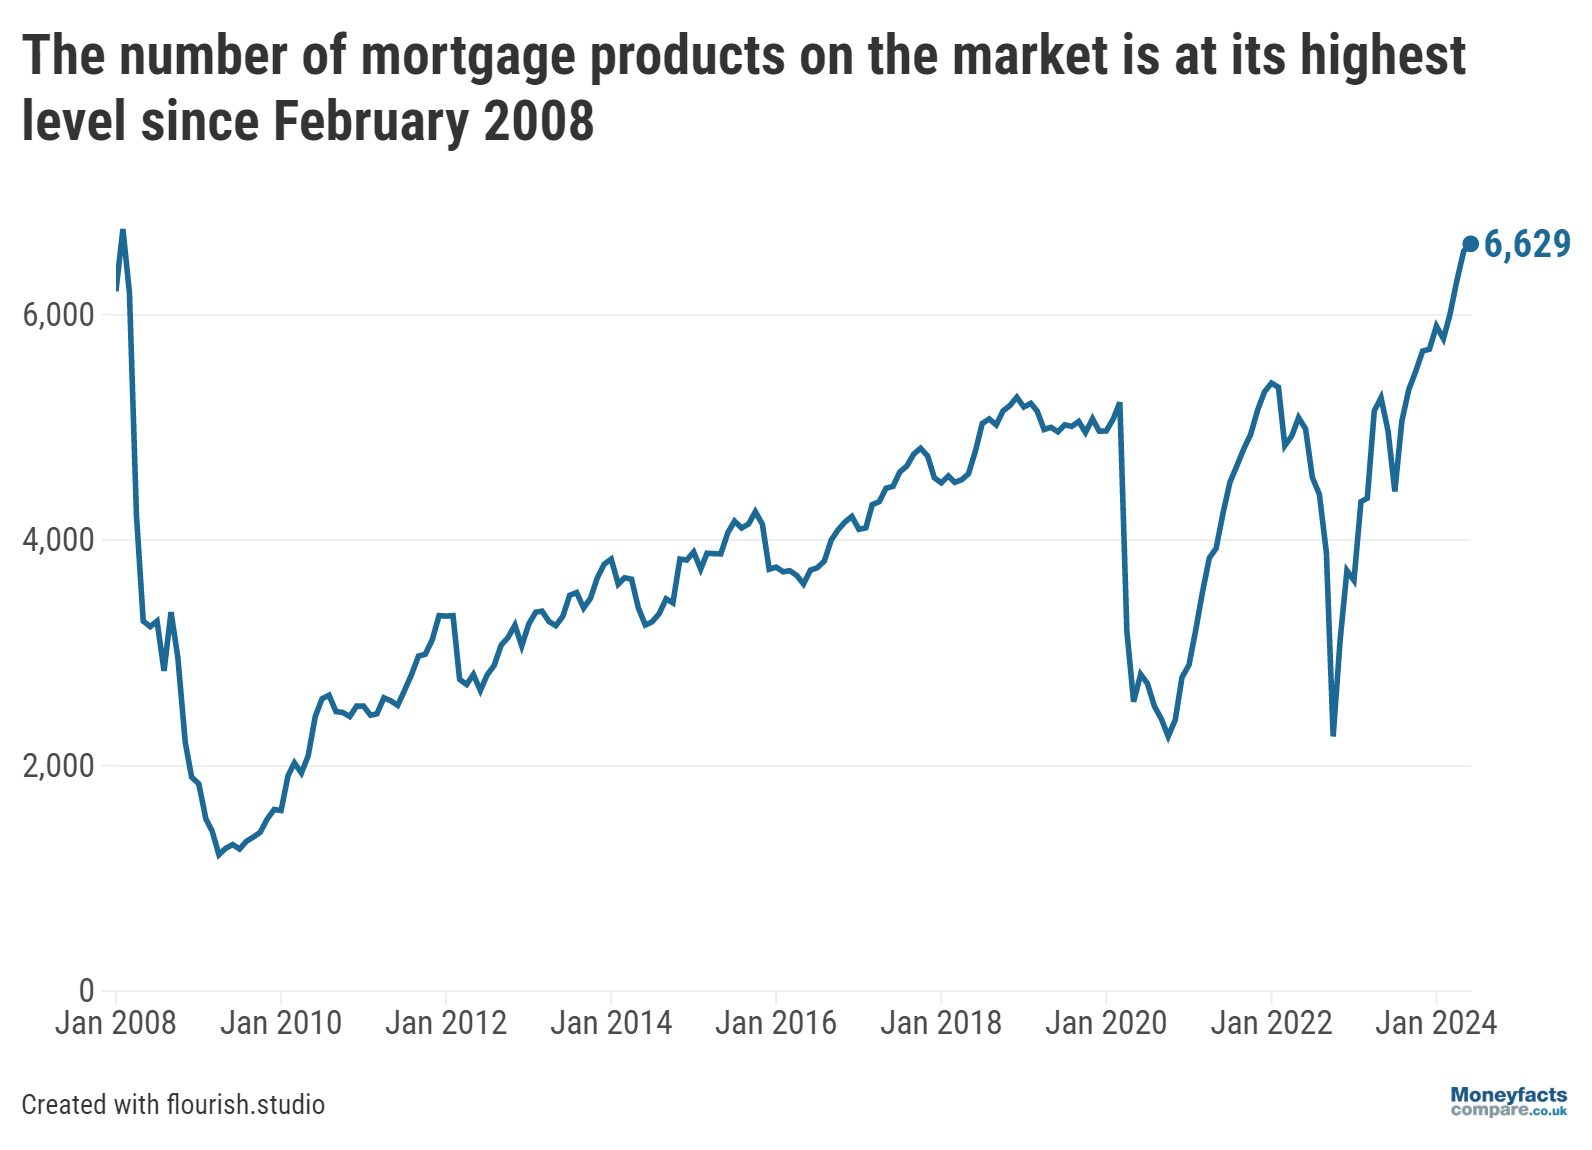 The number of mortgage products on the market is at its highest level since 2008